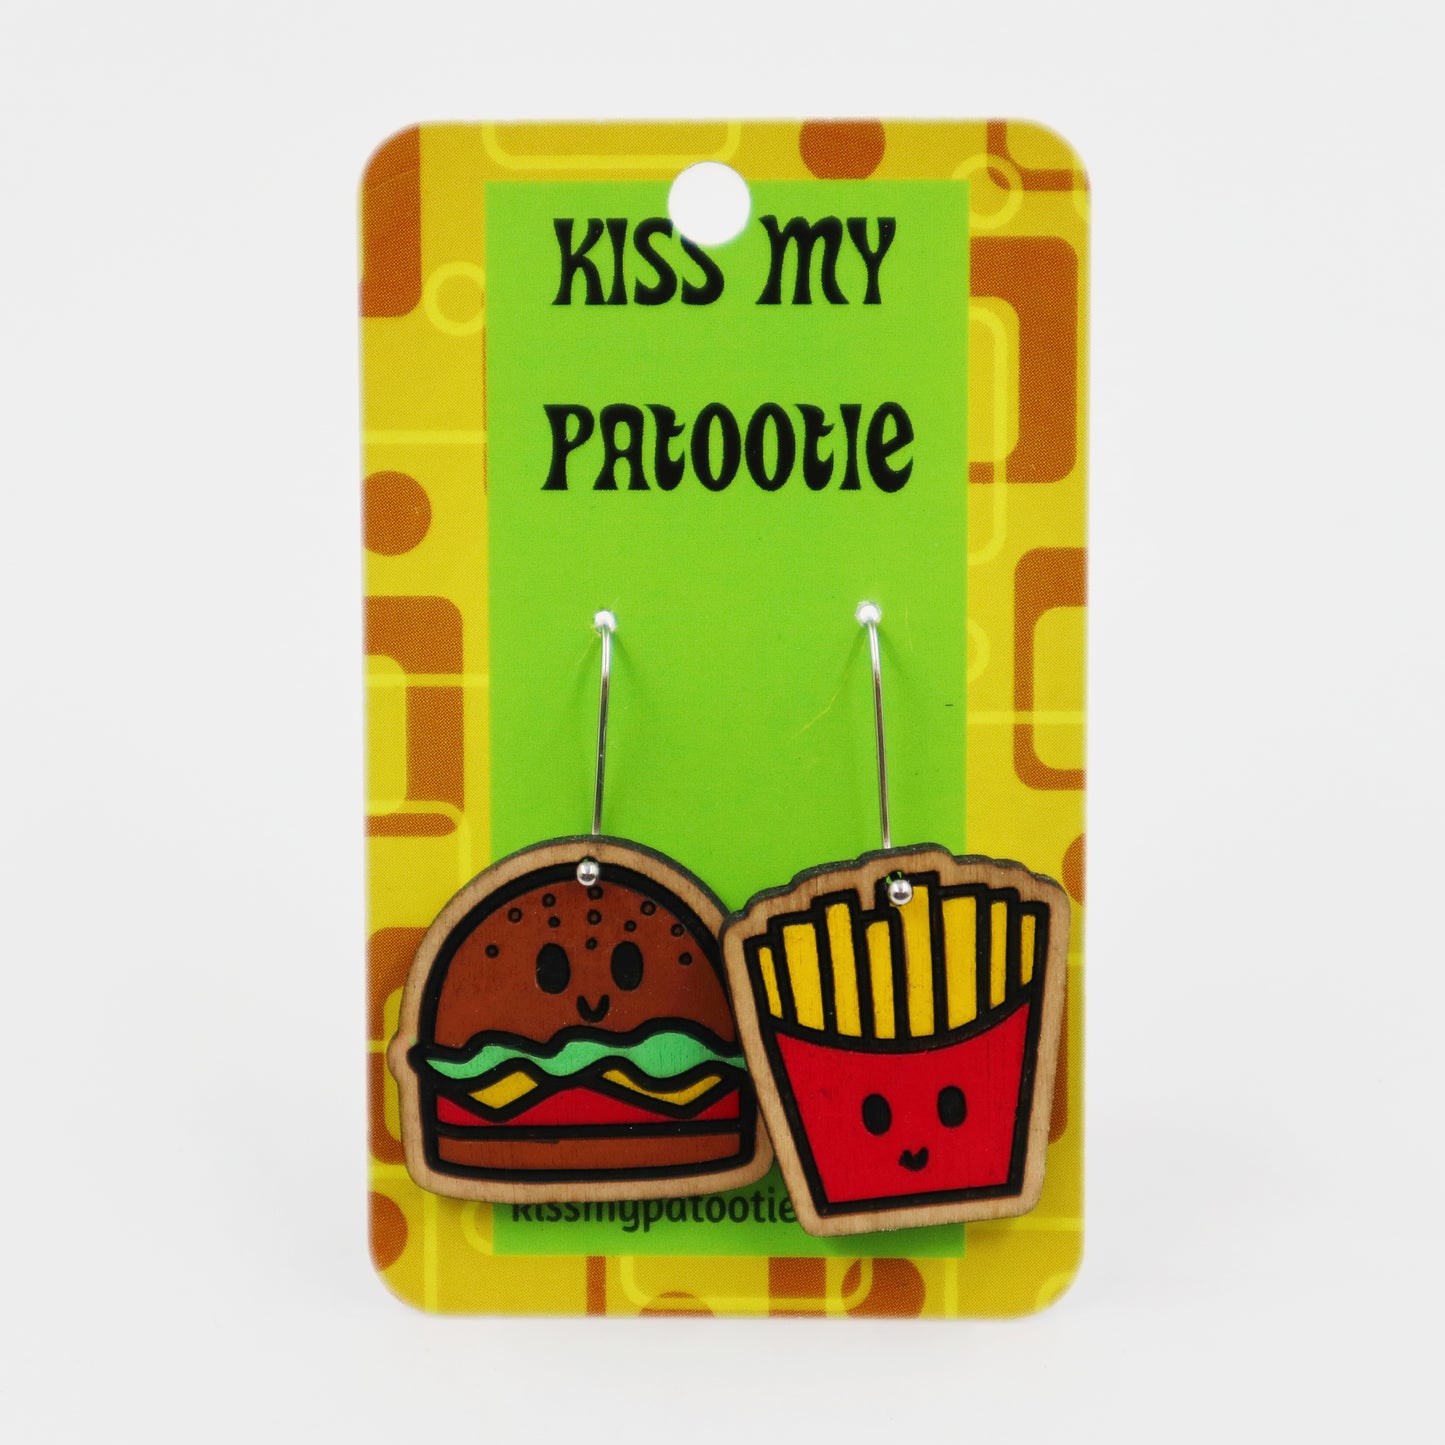 Wooden burger and chips earrings